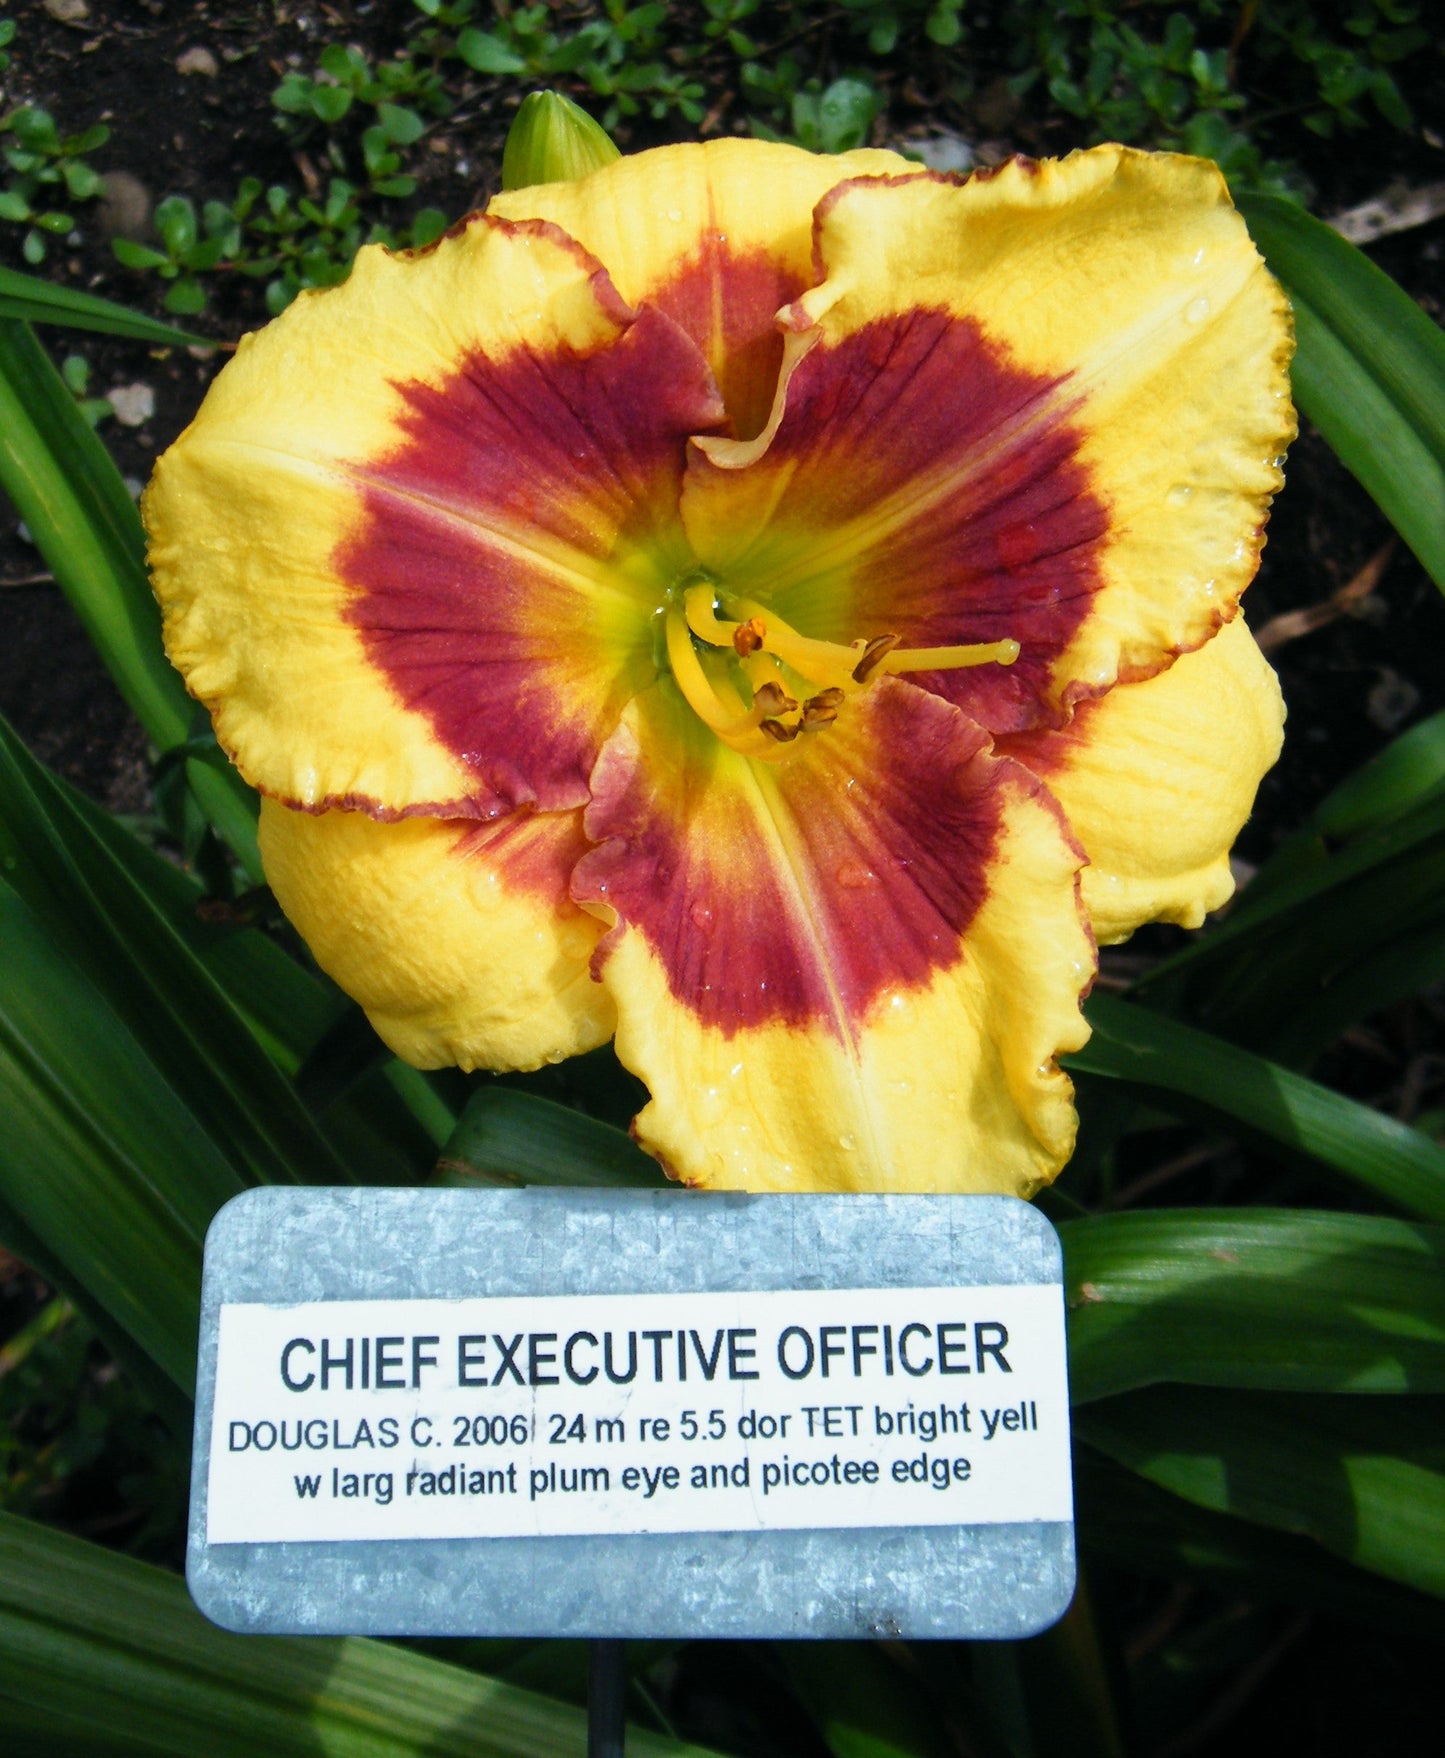 CHIEF EXECUTIVE OFFICER